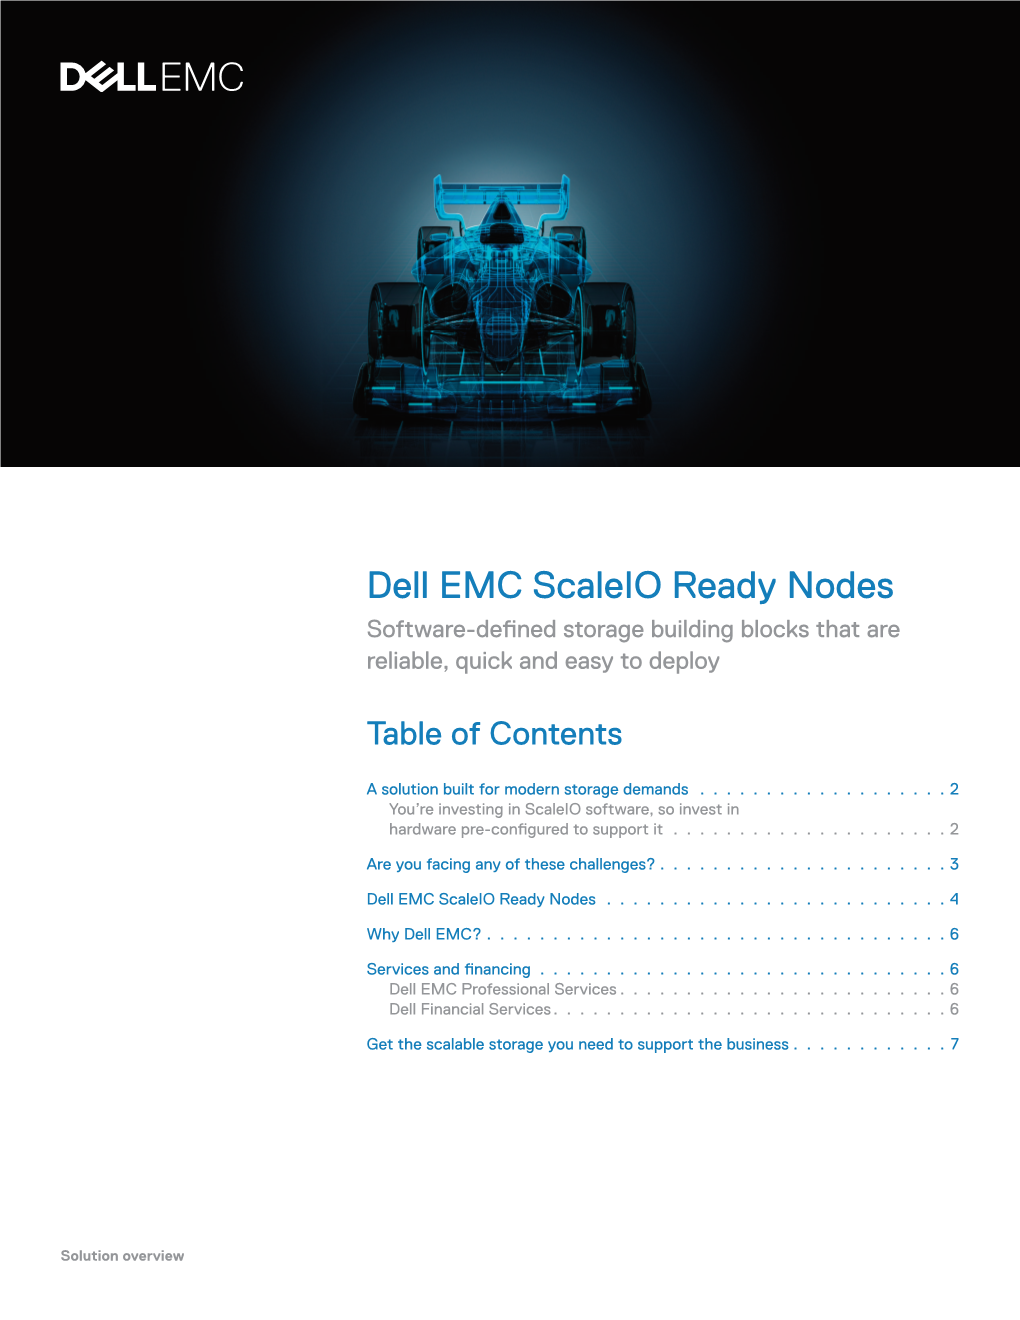 Dell EMC Scaleio Ready Nodes Solution Overview